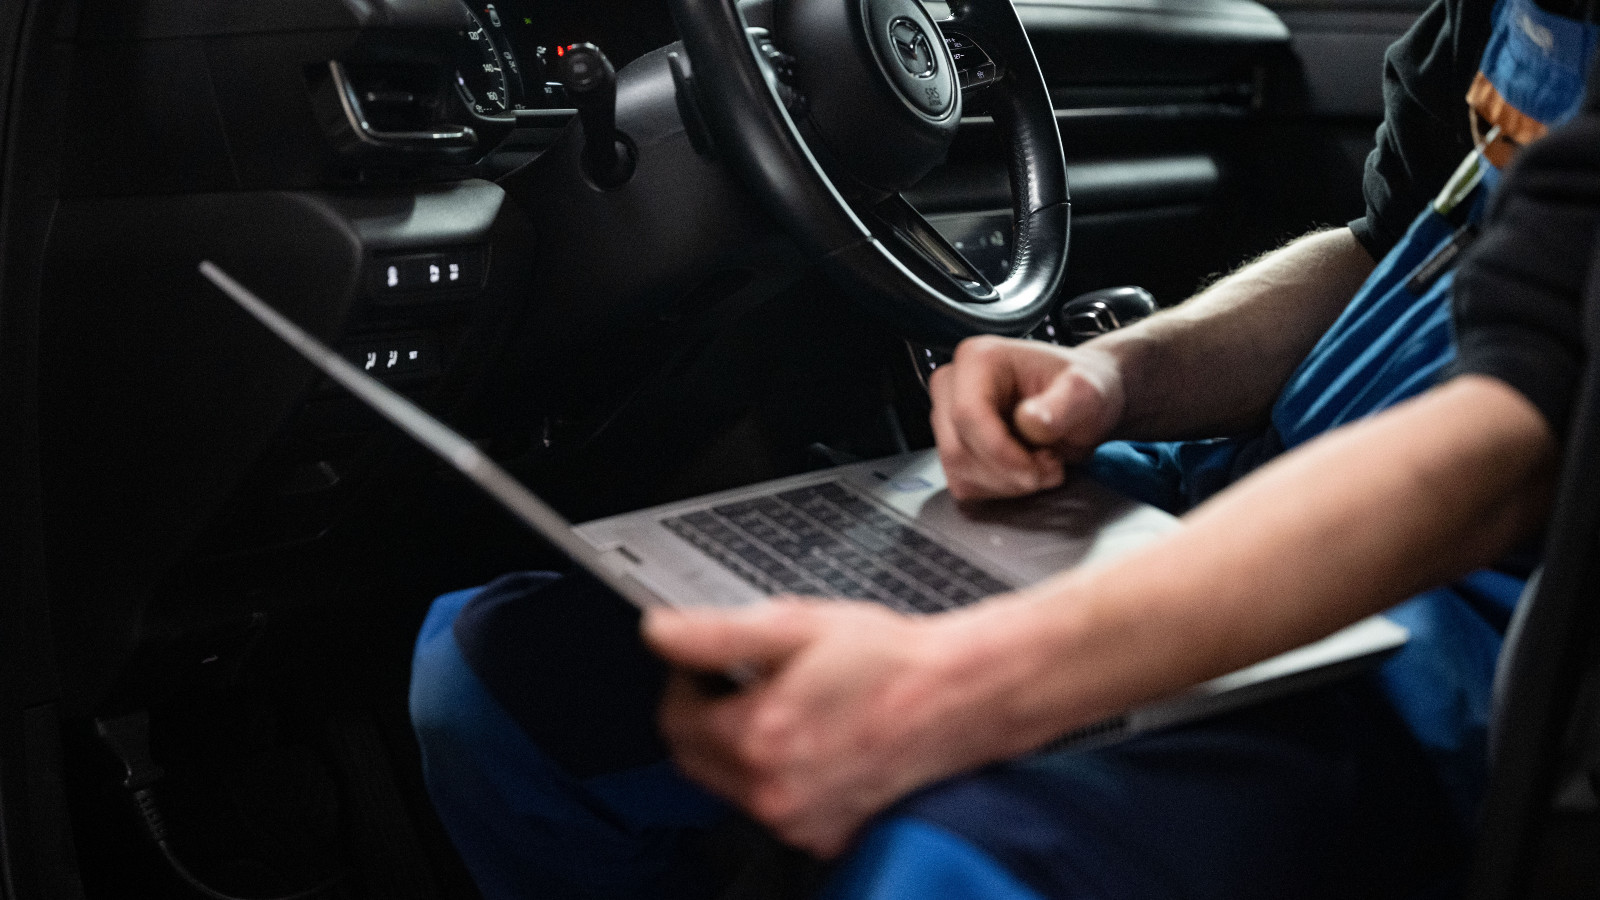 The arms of a white man sitting in the driver's seat of a car holding a laptop